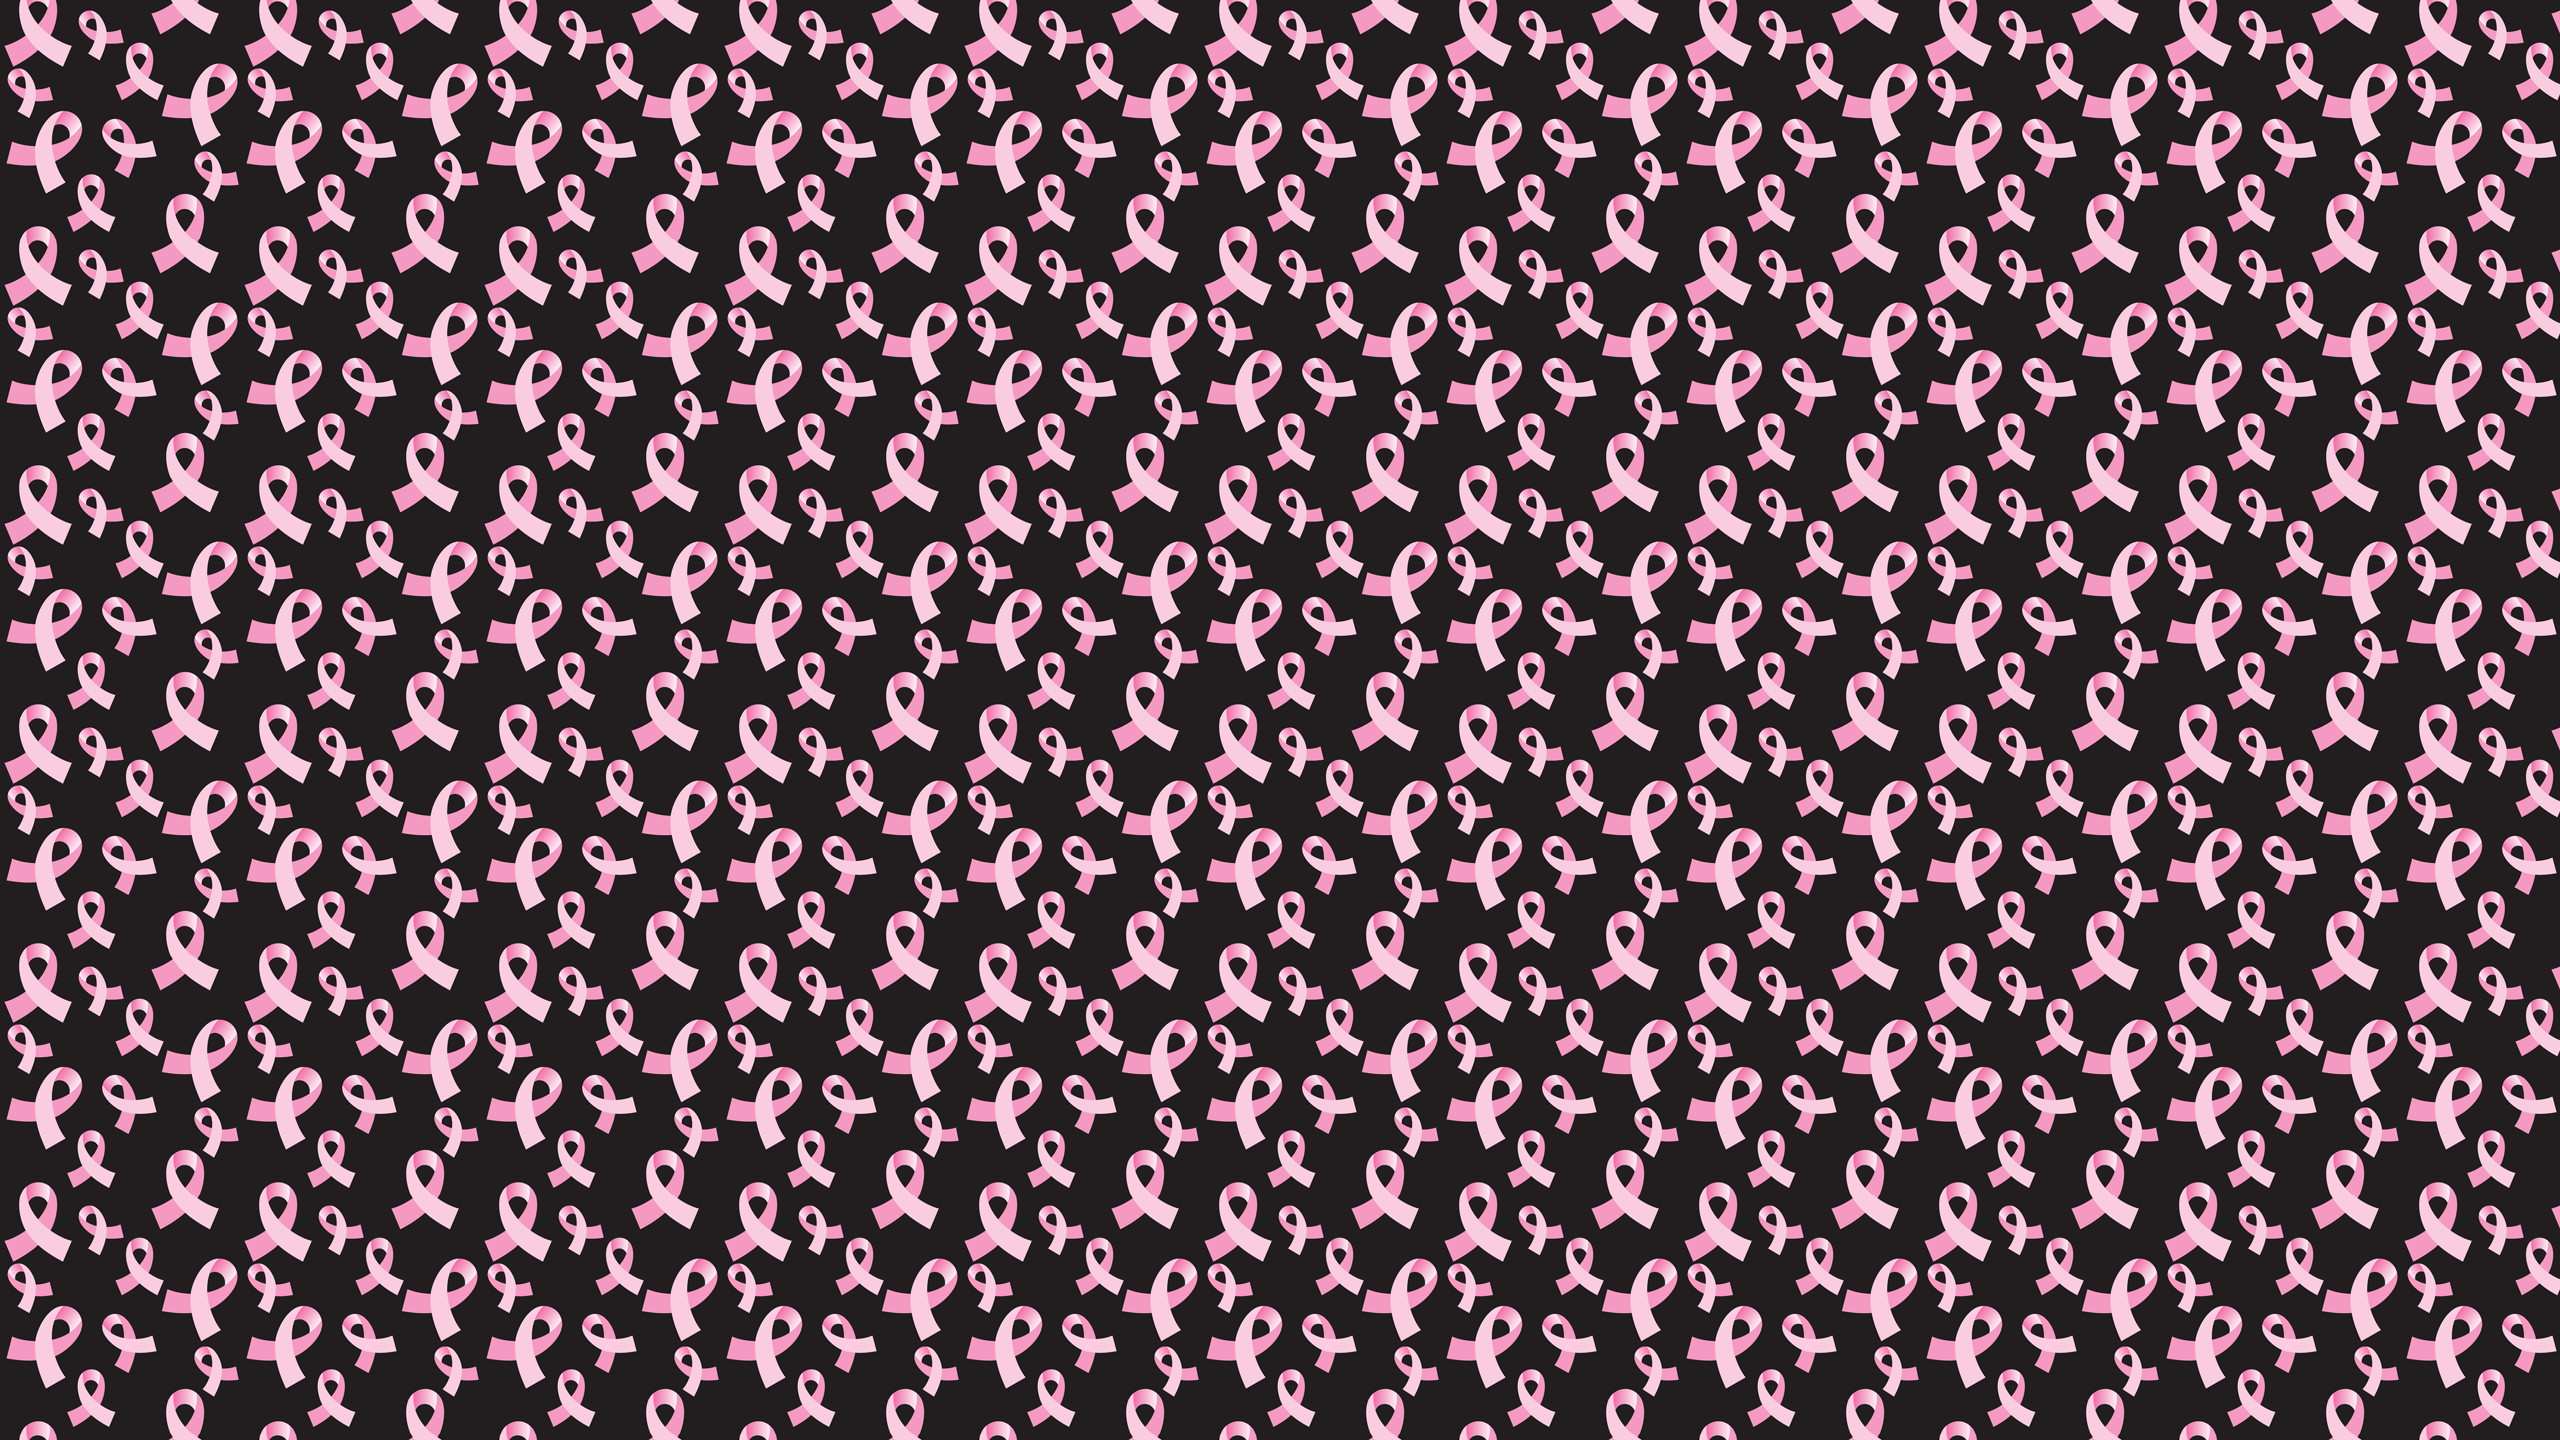 2560x1440 Breast Cancer Wallpapers - Wallpaper Cave